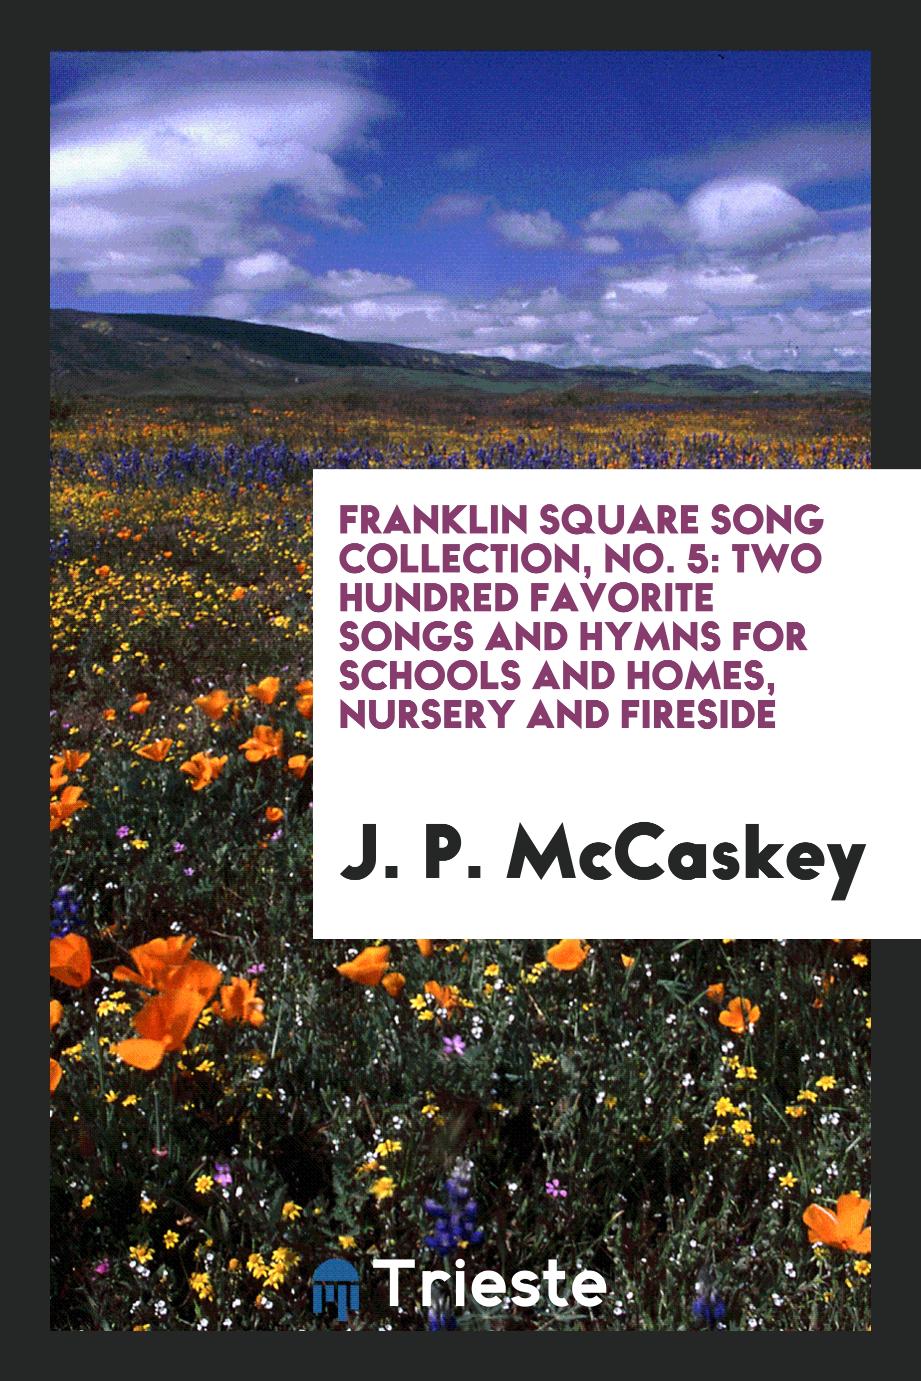 J. P. McCaskey - Franklin Square Song Collection, No. 5: Two Hundred Favorite Songs and Hymns for Schools and Homes, Nursery and Fireside